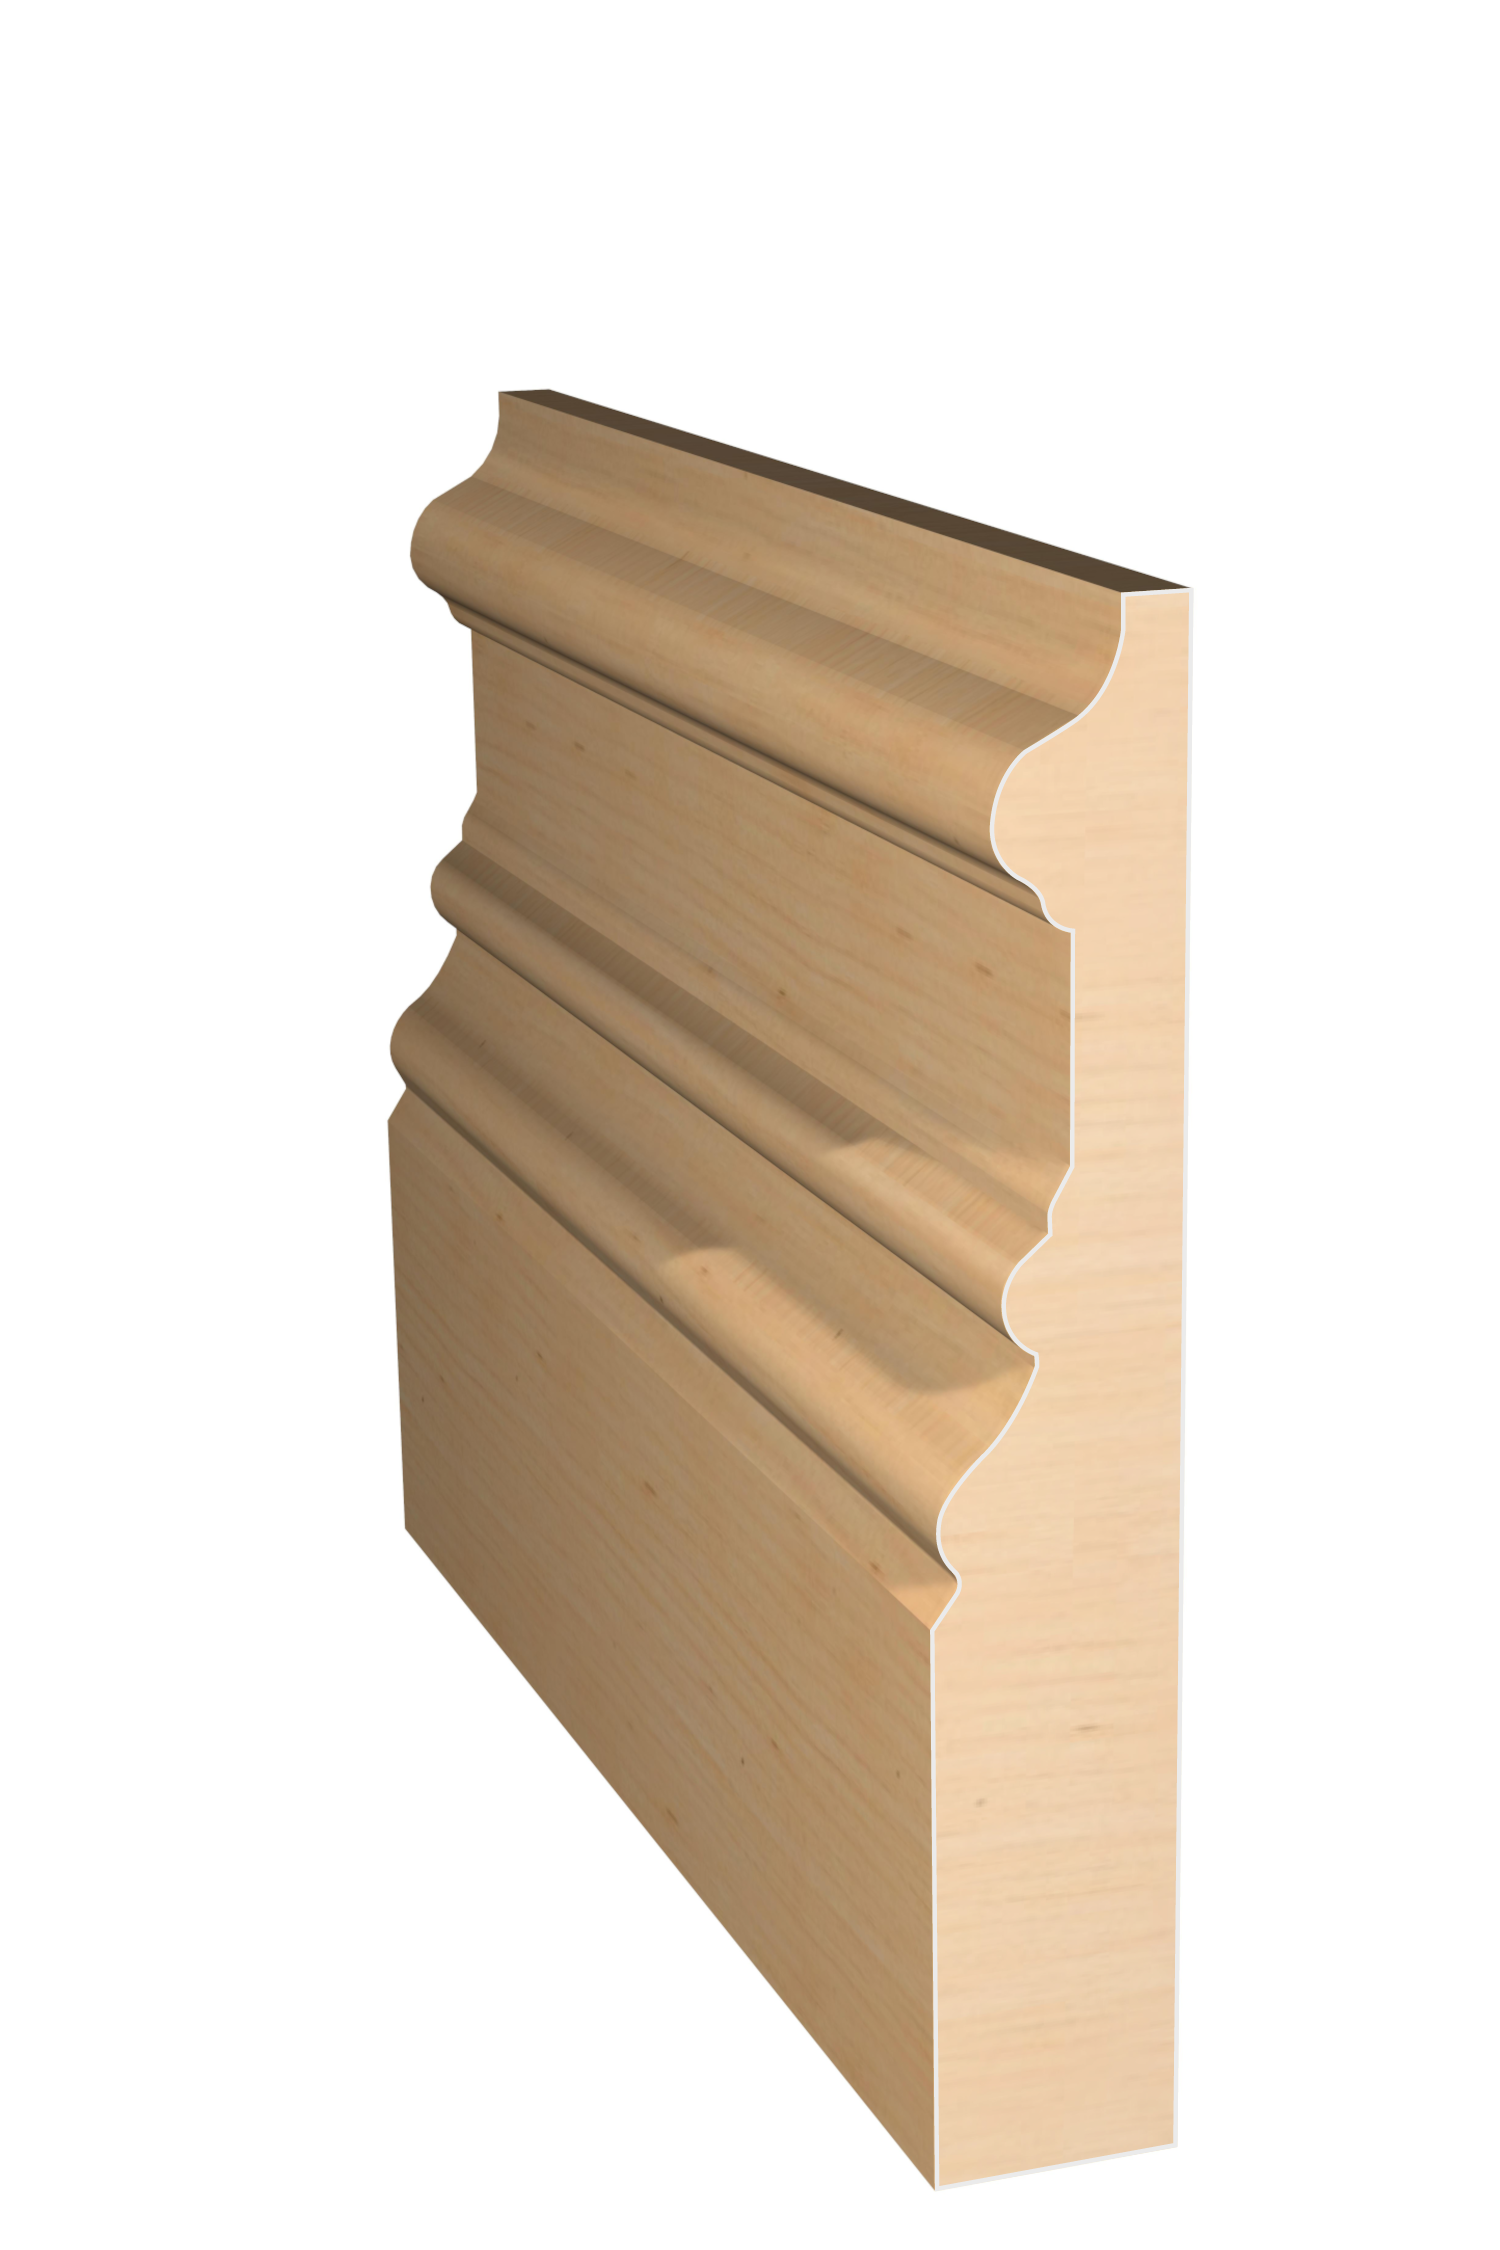 Three dimensional rendering of custom base wood molding BAPL4122 made by Public Lumber Company in Detroit.